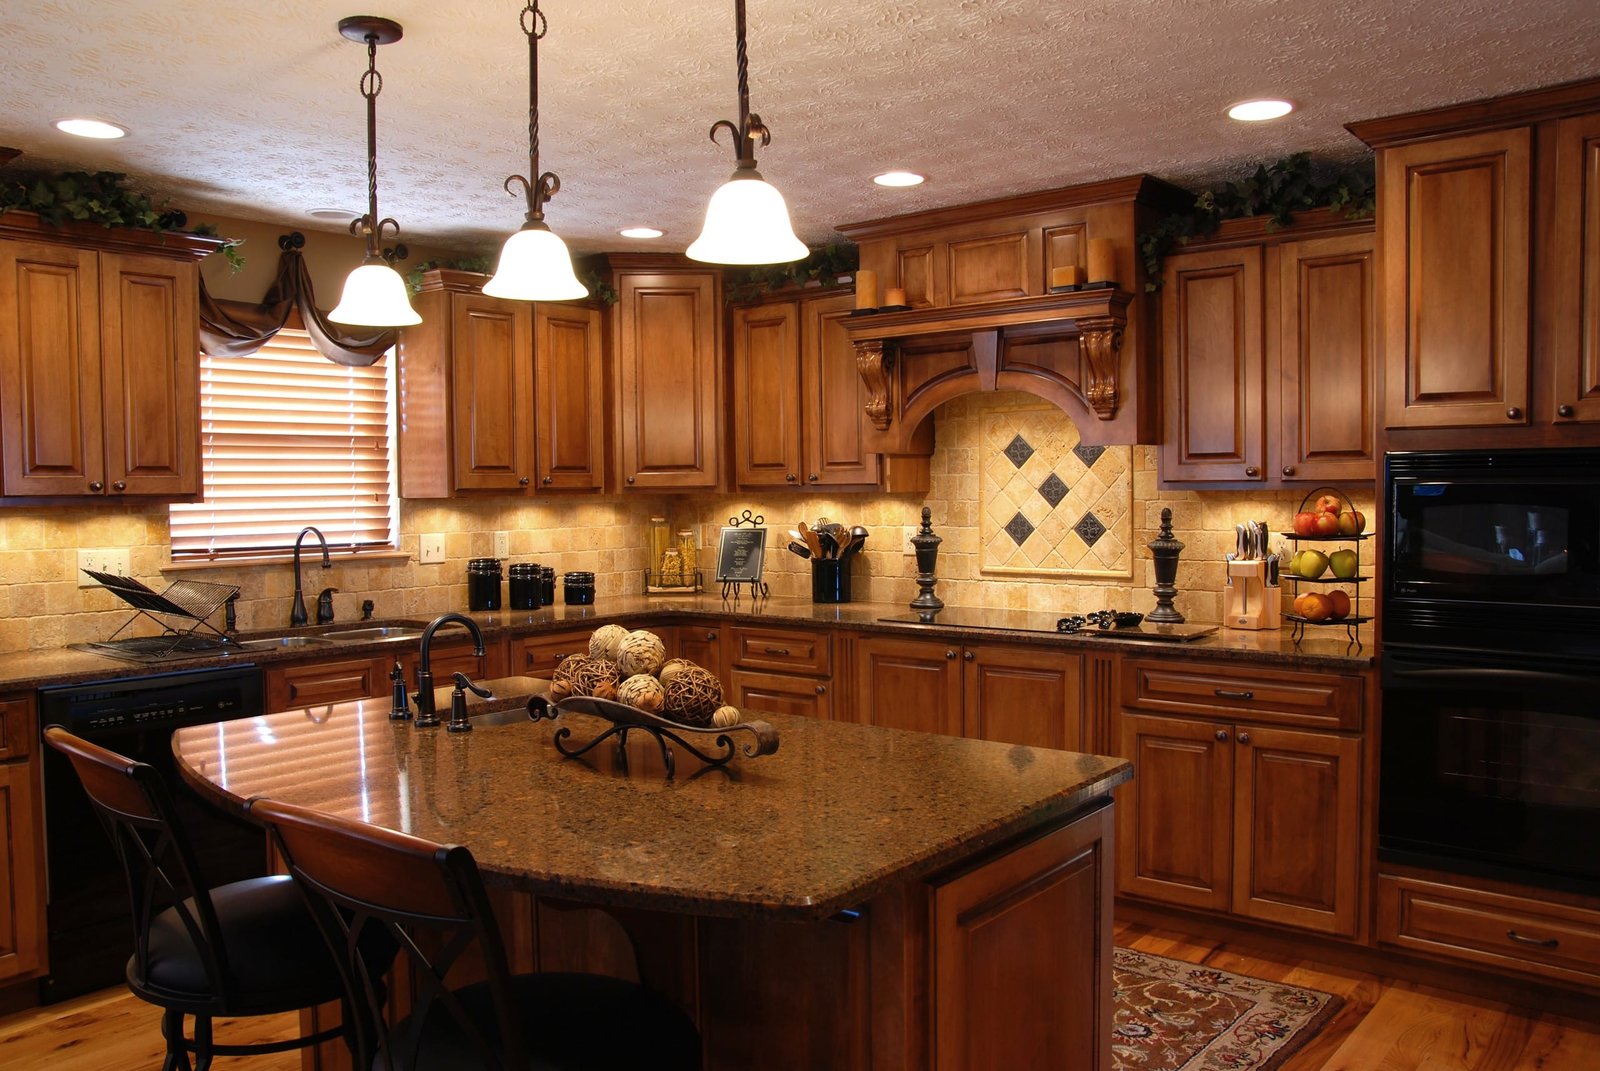 Why People Most Choose Walnut Kitchen Cabinets Over Other Options - Readesh